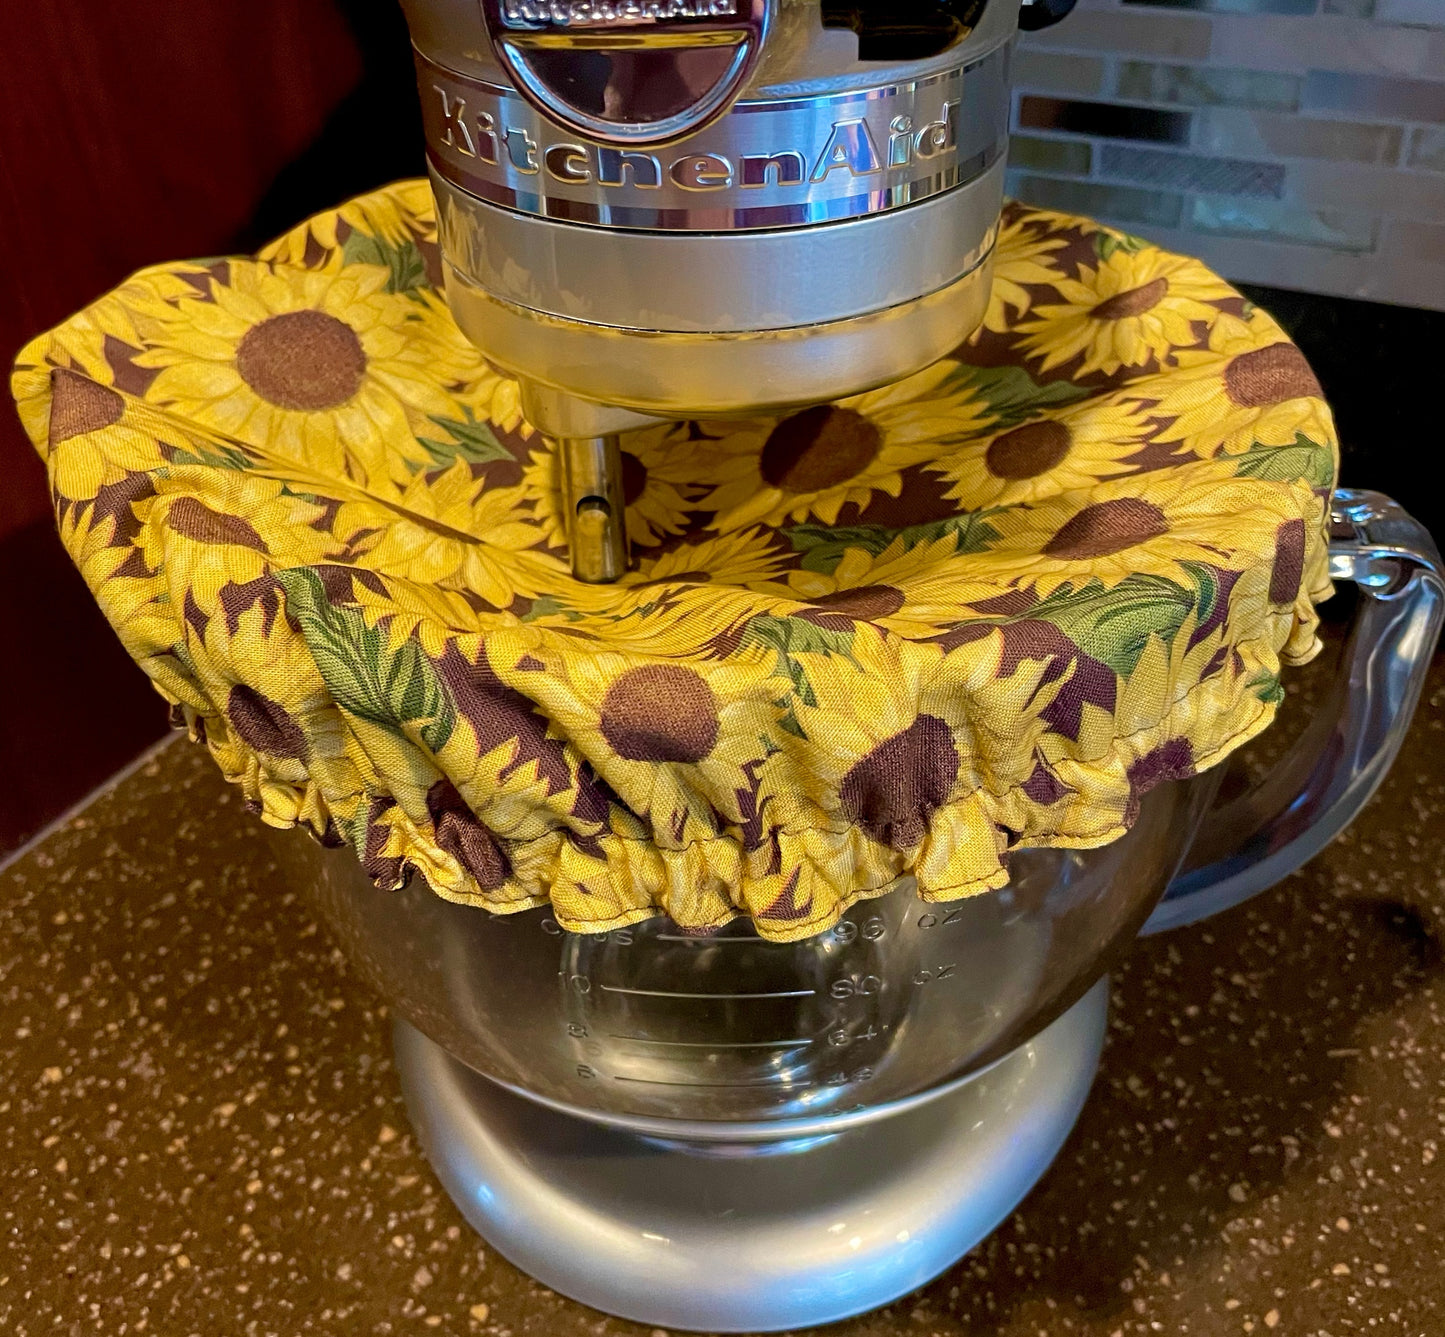 Stand Mixer Bowl Covers - Big Sunflowers